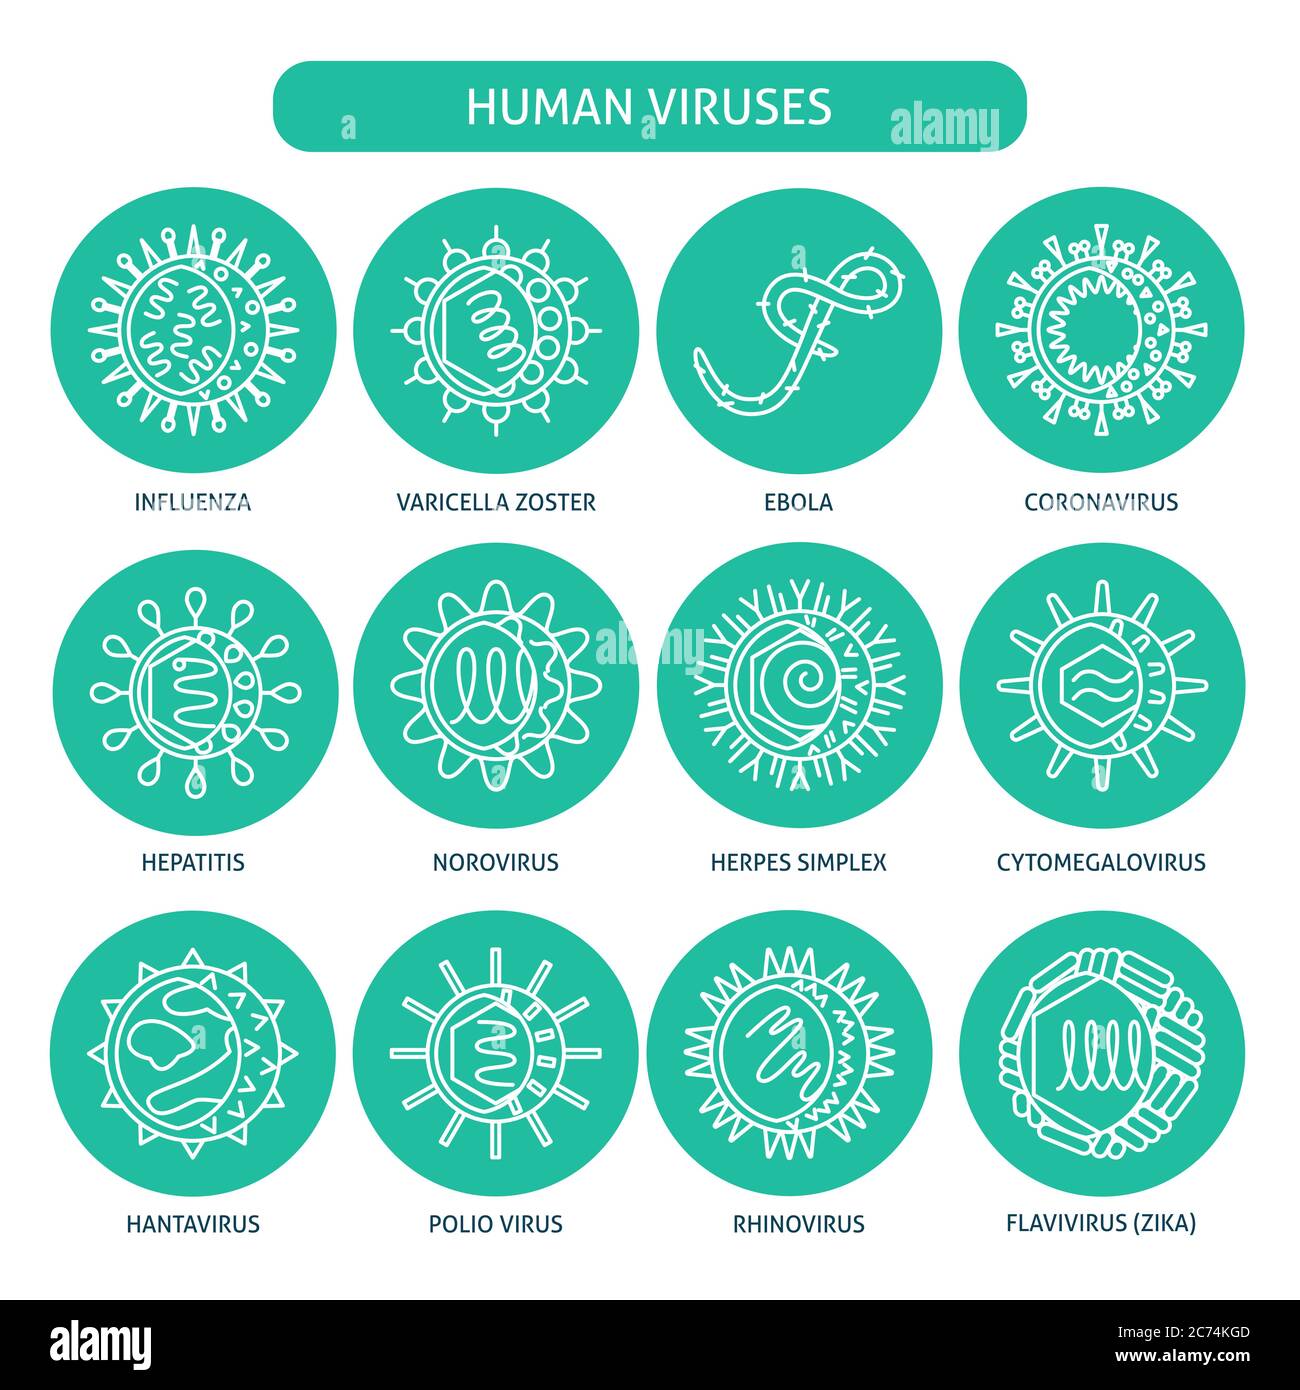 Human virus types icon set. Infection microorganism symbols collection in line style. Vector illustration. Stock Vector